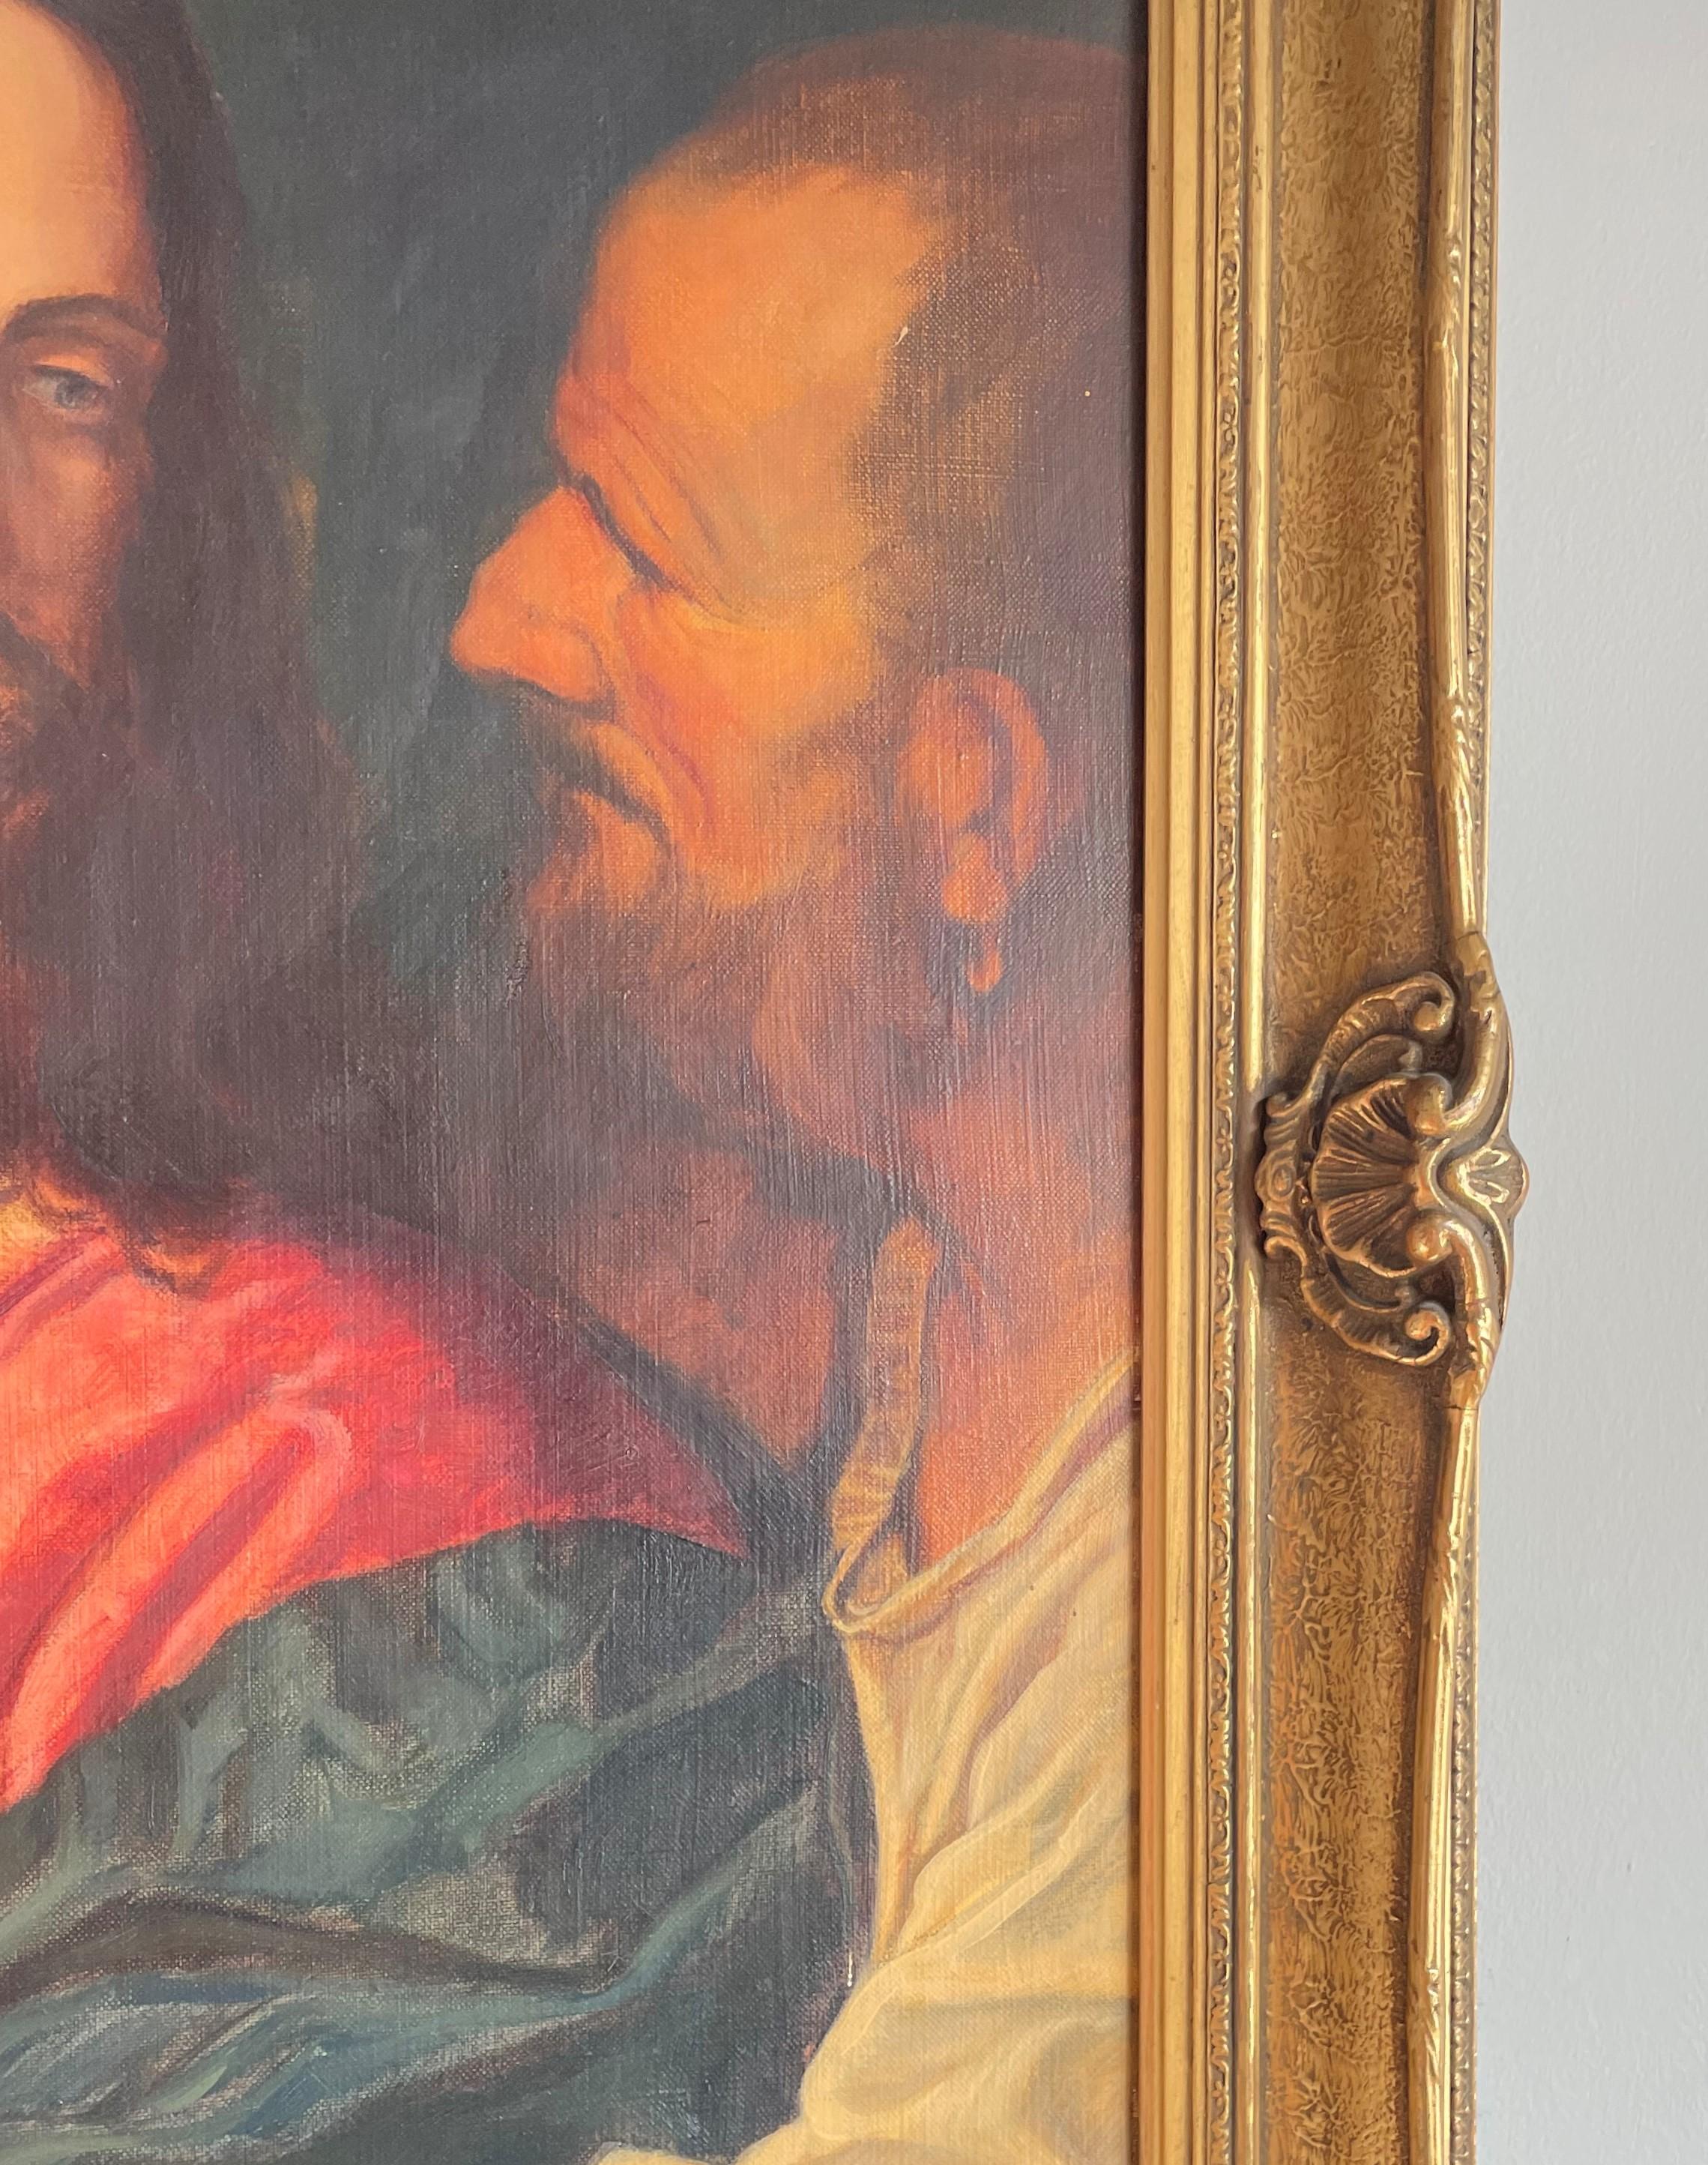 20th Century Good Size Hand Painted Antique Oil on Canvas Painting of Jesus Christ and Judas